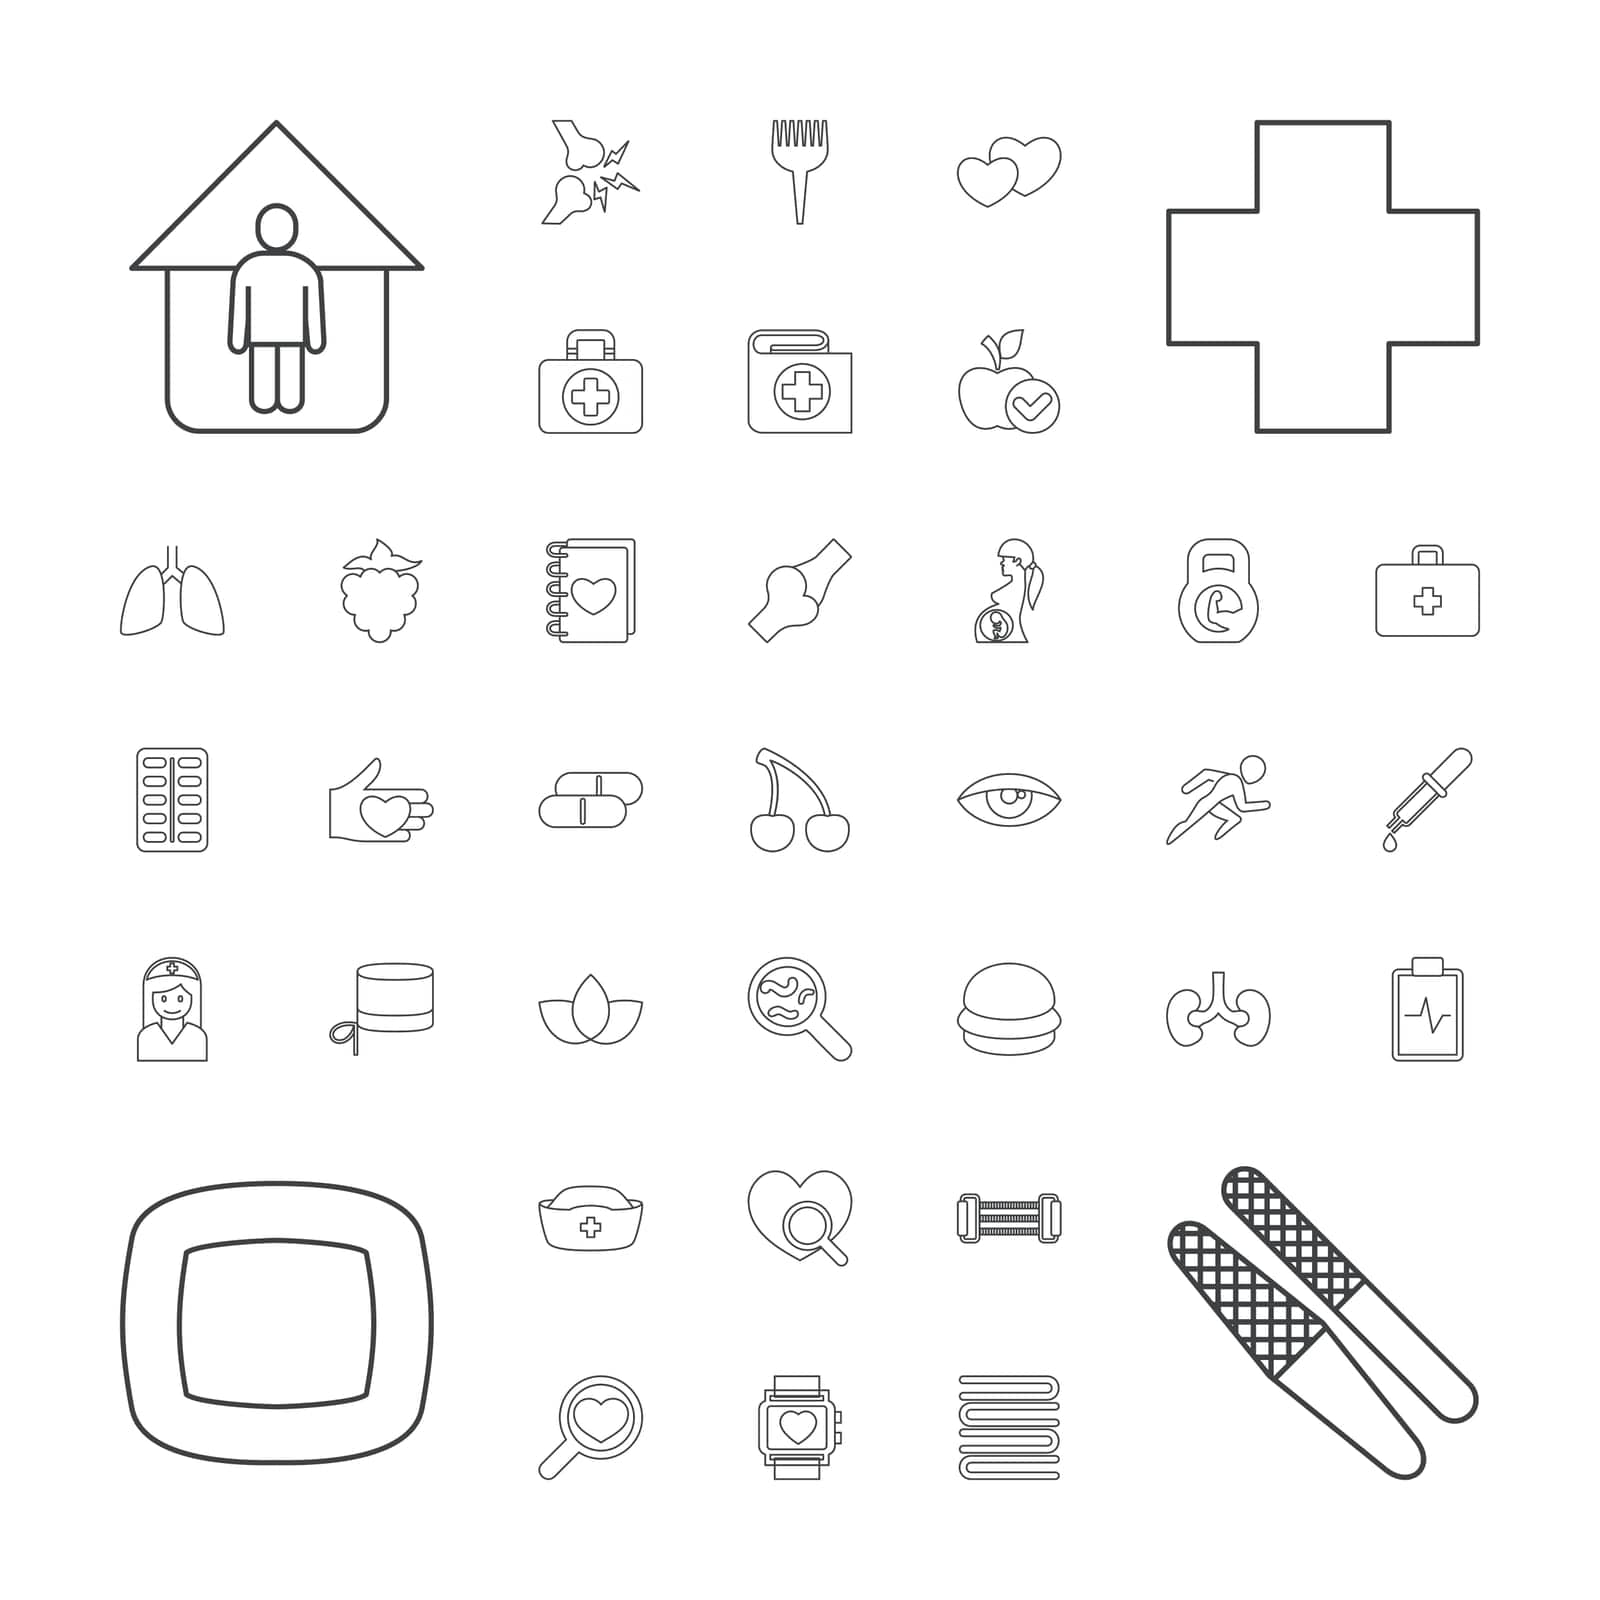 cherry,medical,woman,icon,barbell,pill,leg,bandage,running,apple,kit,nurse,lungs,hat,vector,man,barber,arm,hand,notebook,pregnant,broken,brush,set,or,in,cross,health,bone,mulberry,heart,home,eye,with,pipette,aid,first